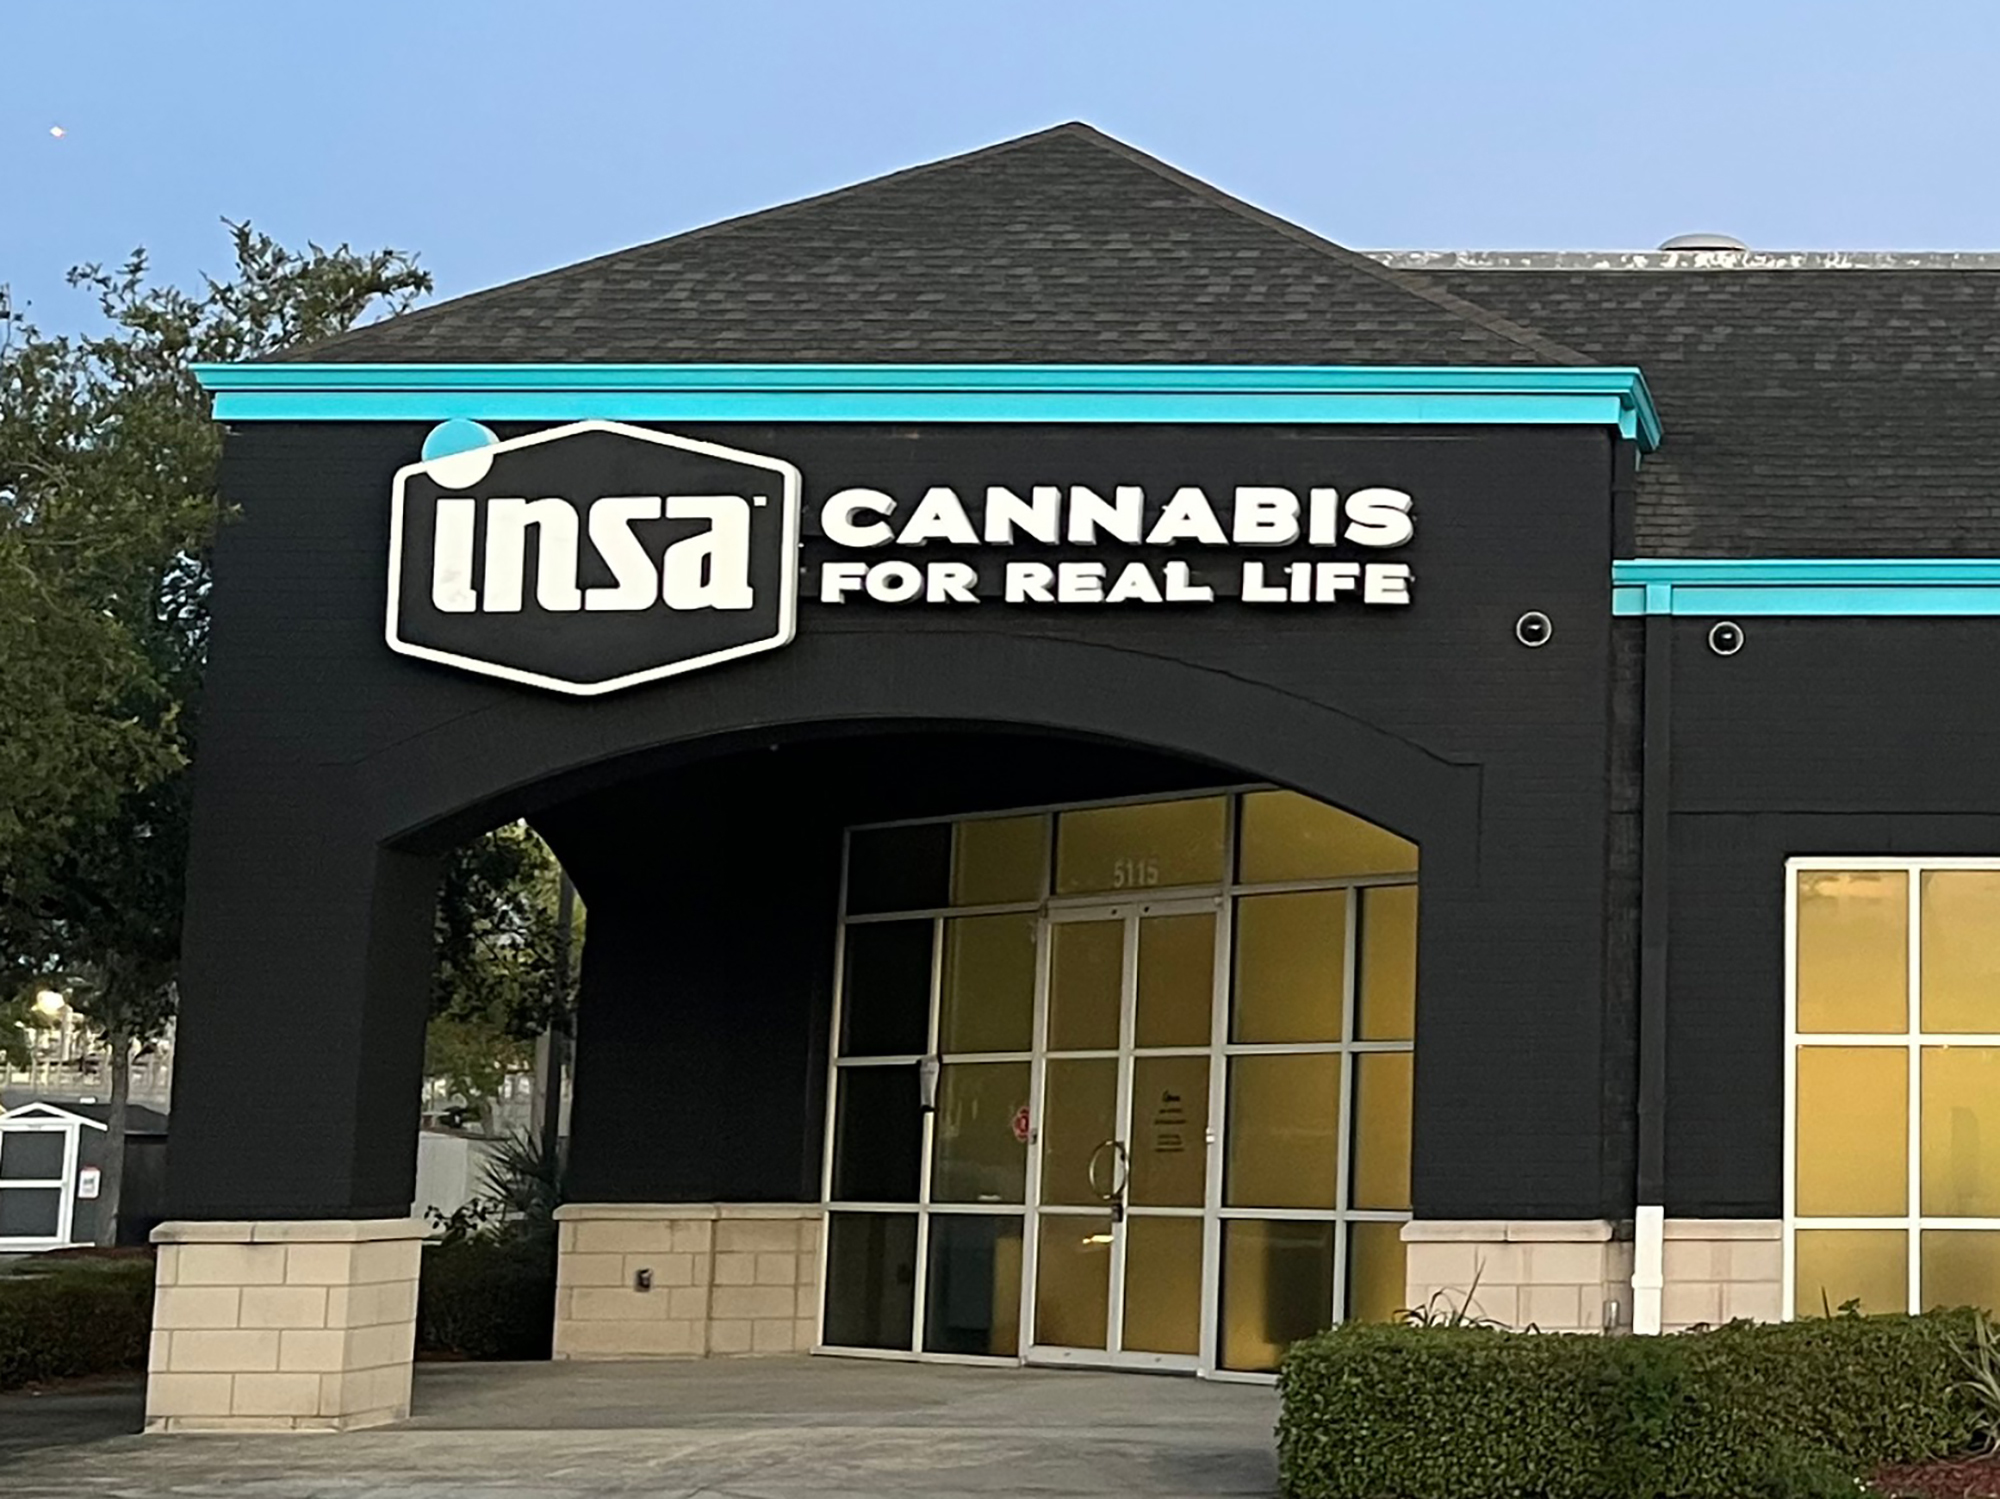 The Insa dispensary in Tampa.